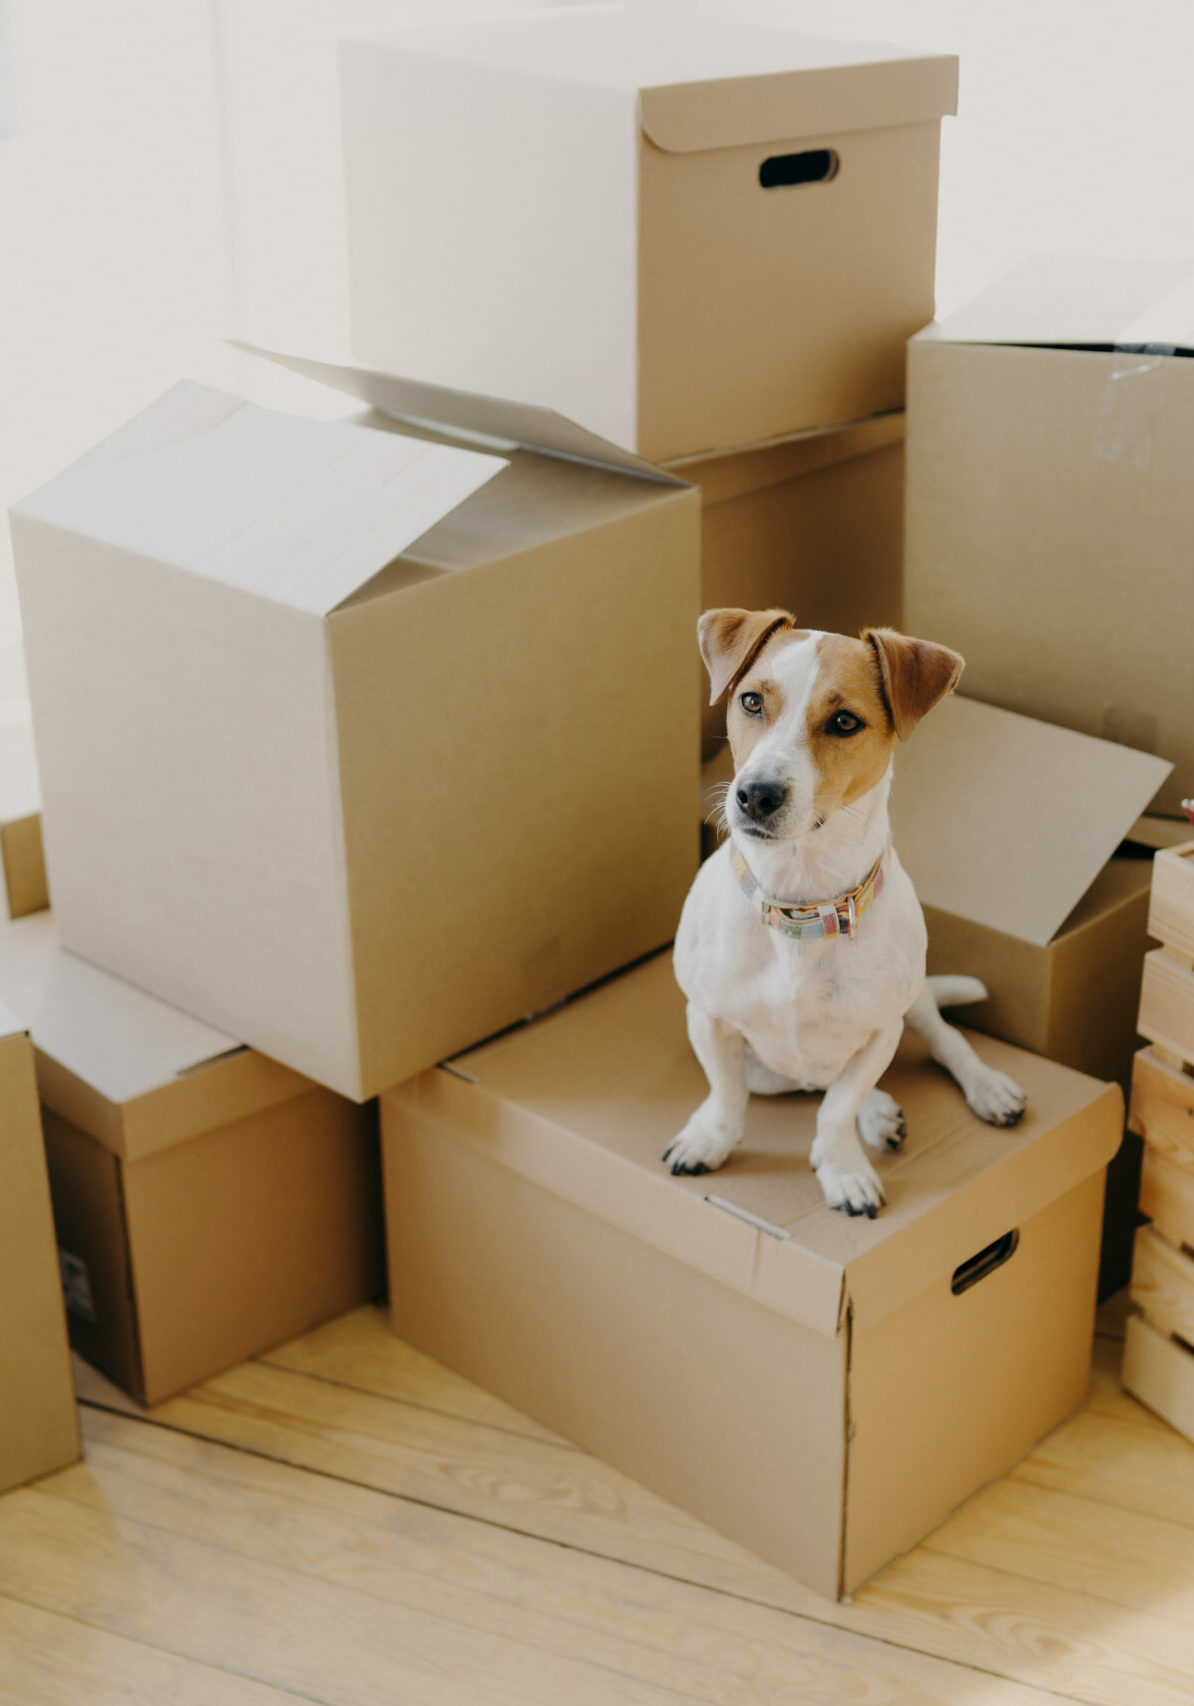 Top view of domestic animal dog poses on cardboard boxes with personal stuff, poses in flat where repairing is, drill and wooden box with indoor plant and book near, big window in background